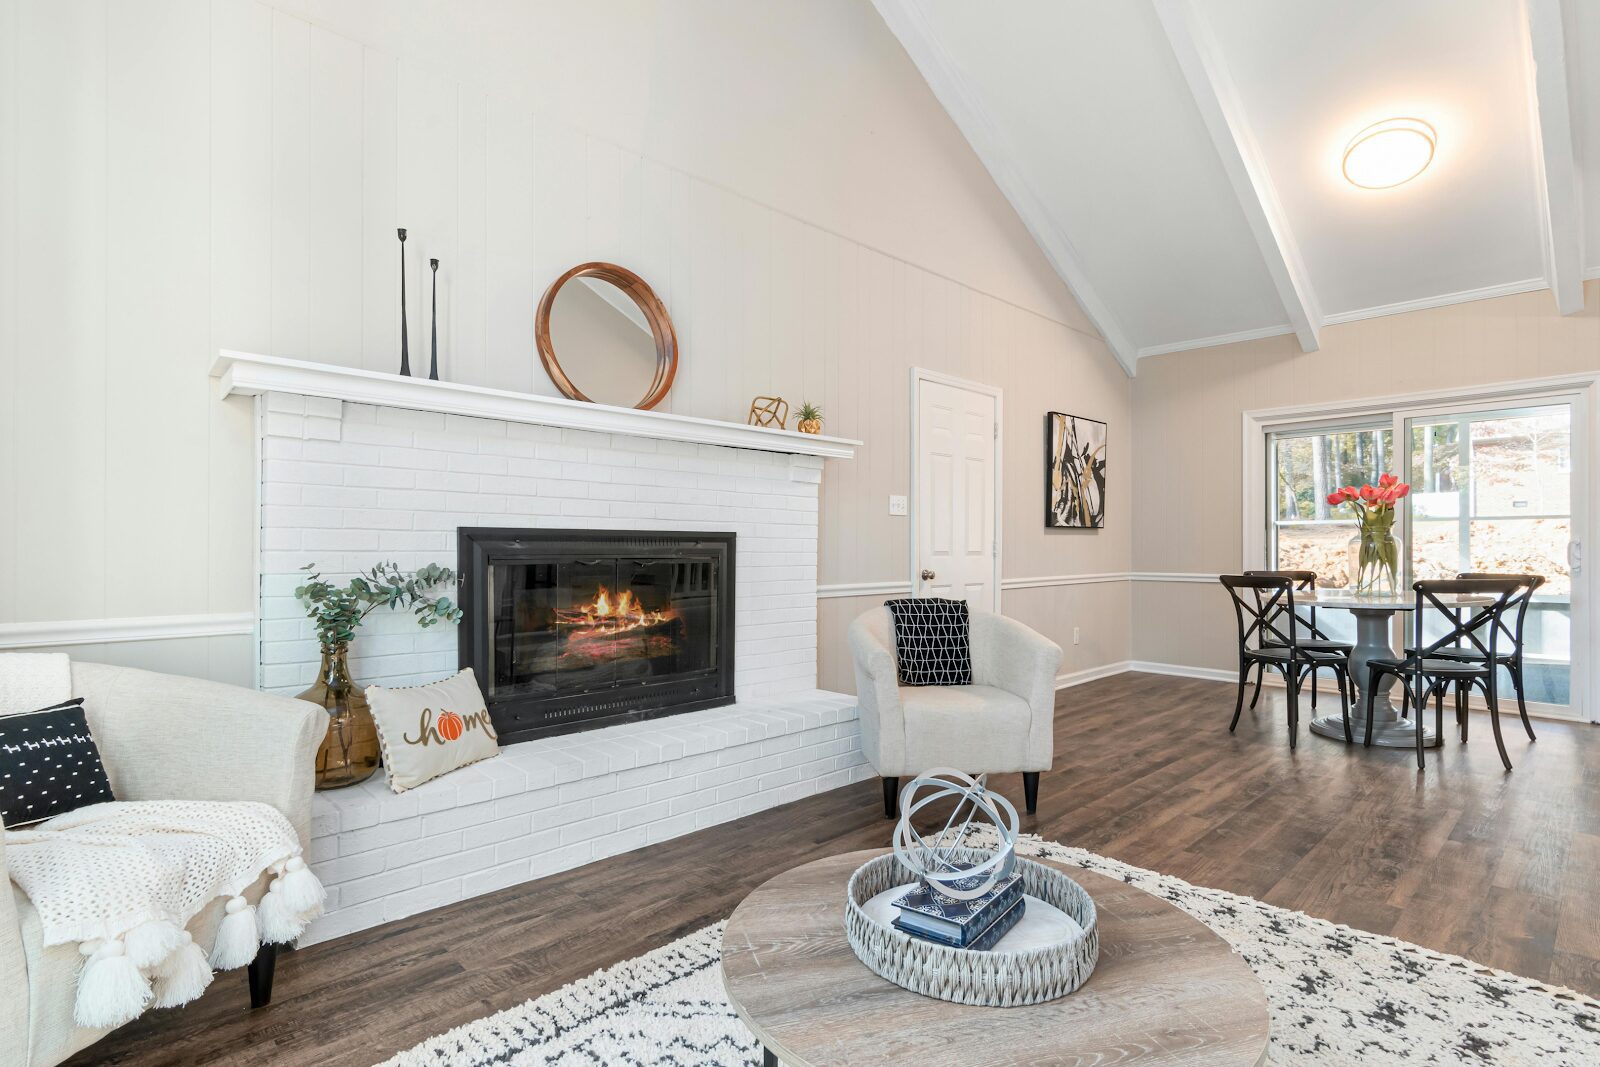 https://www.pexels.com/photo/house-with-a-fireplace-5698011/